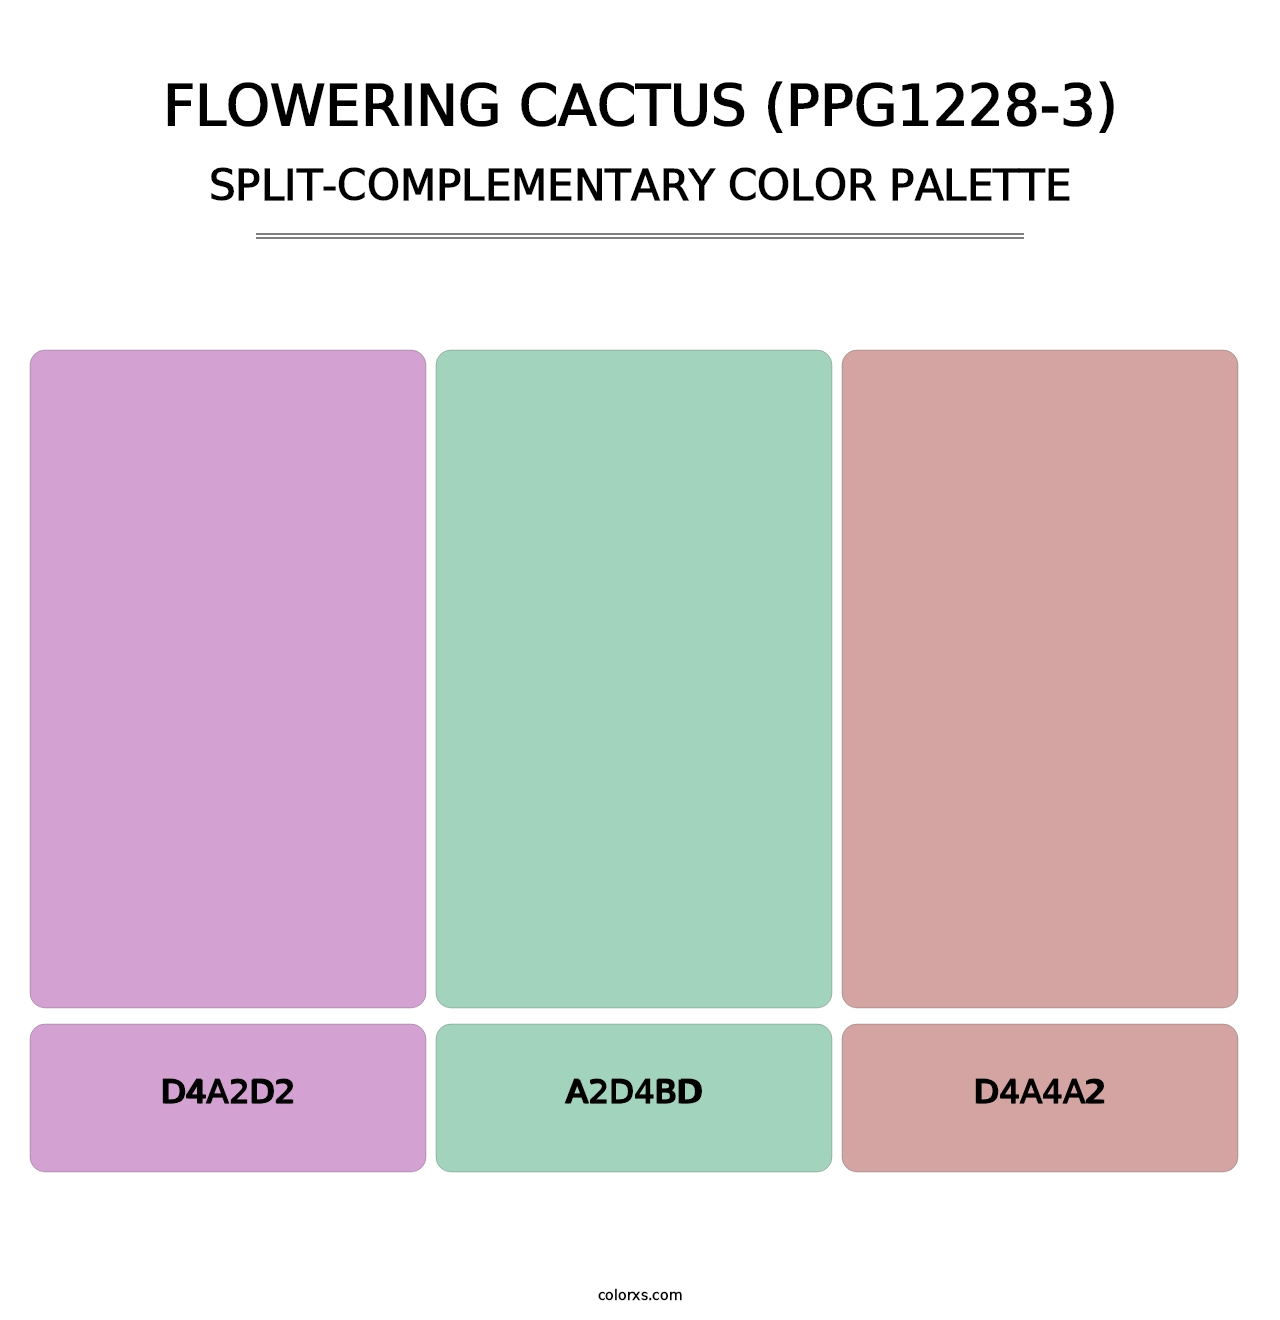 Flowering Cactus (PPG1228-3) - Split-Complementary Color Palette